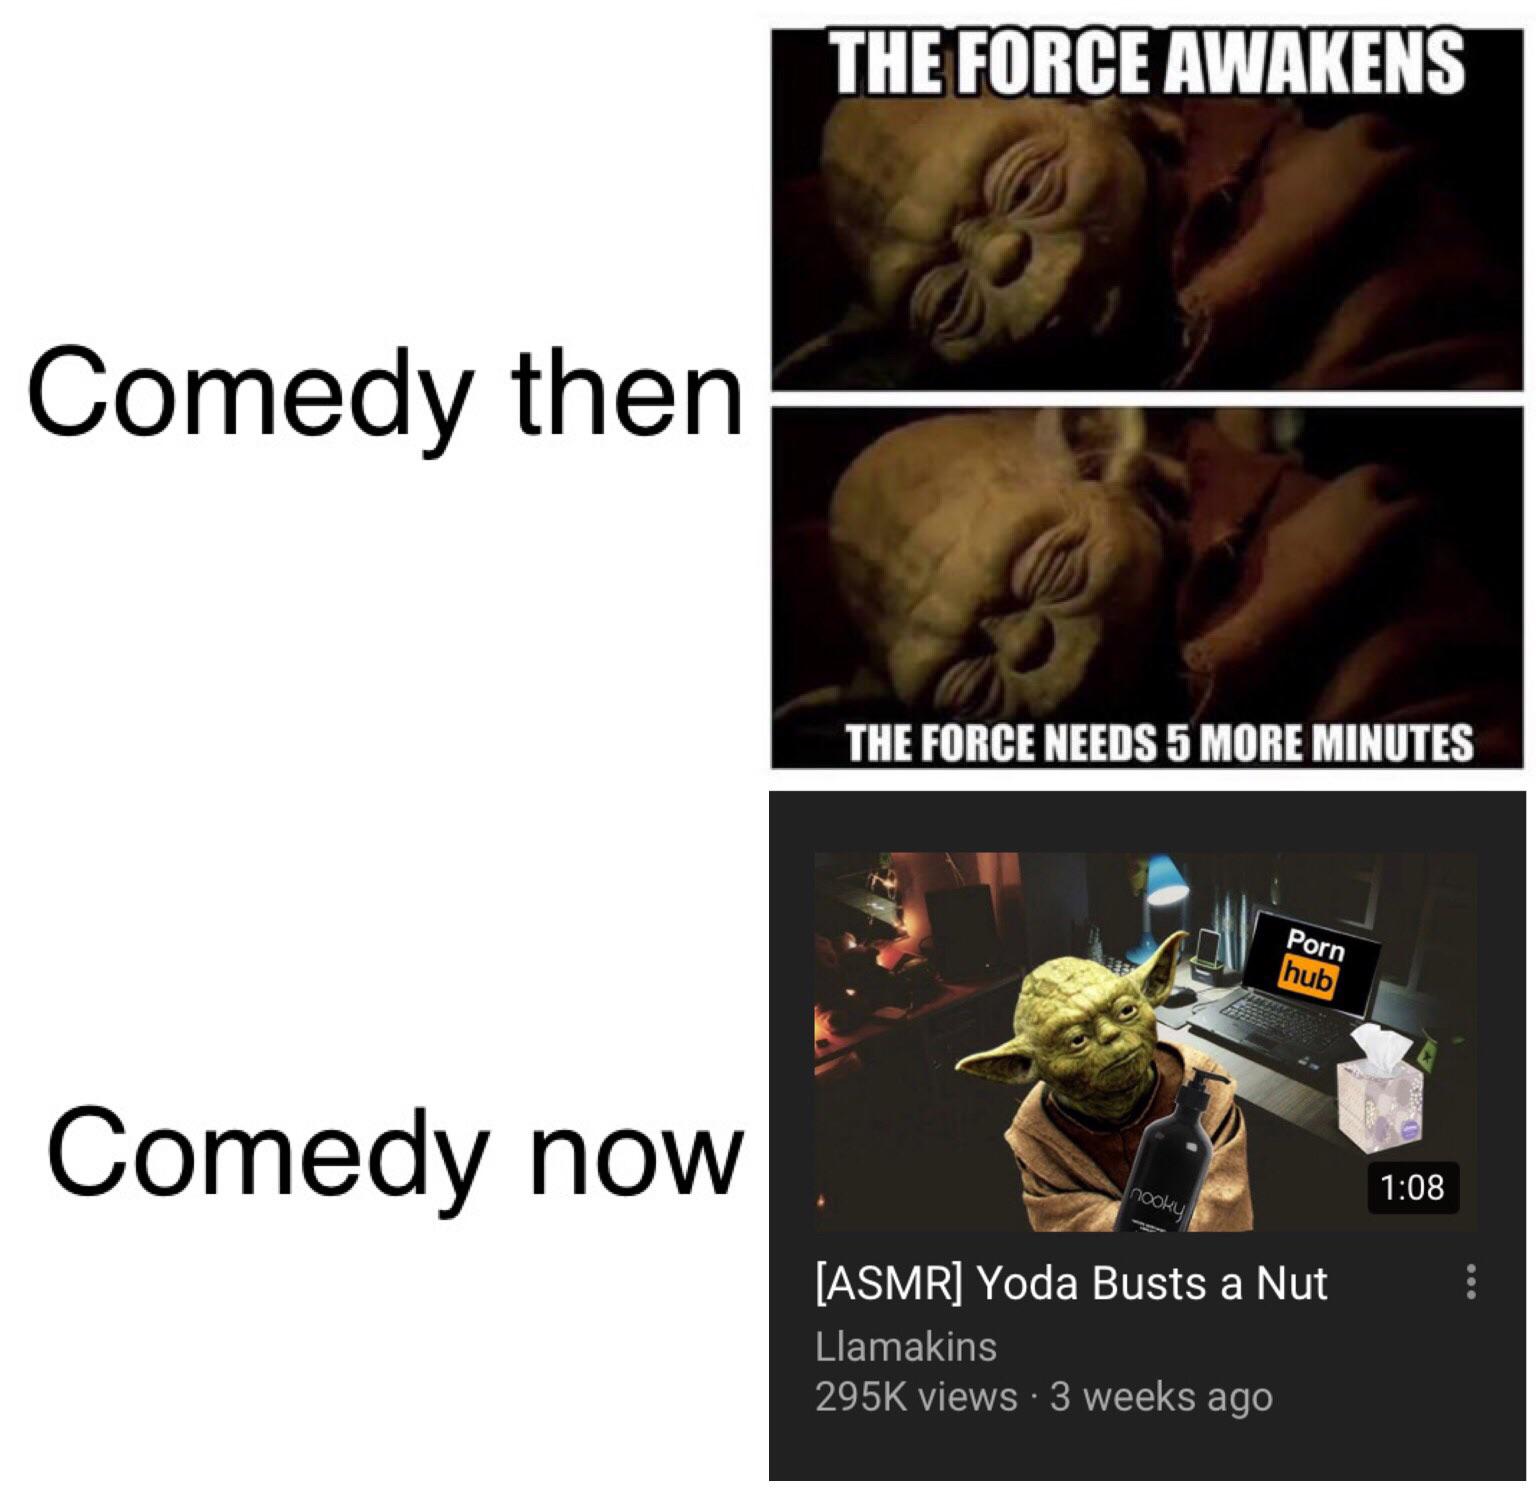 star-wars prequel-memes star-wars text: THE FORCE AWAKENS Comedy then THE FORCE NEEDS 5 MORE MINUTES Comedy now porn 1:08 [ASMR] Yoda Busts a Nut Llamakins 295K views • 3 weeks ago 